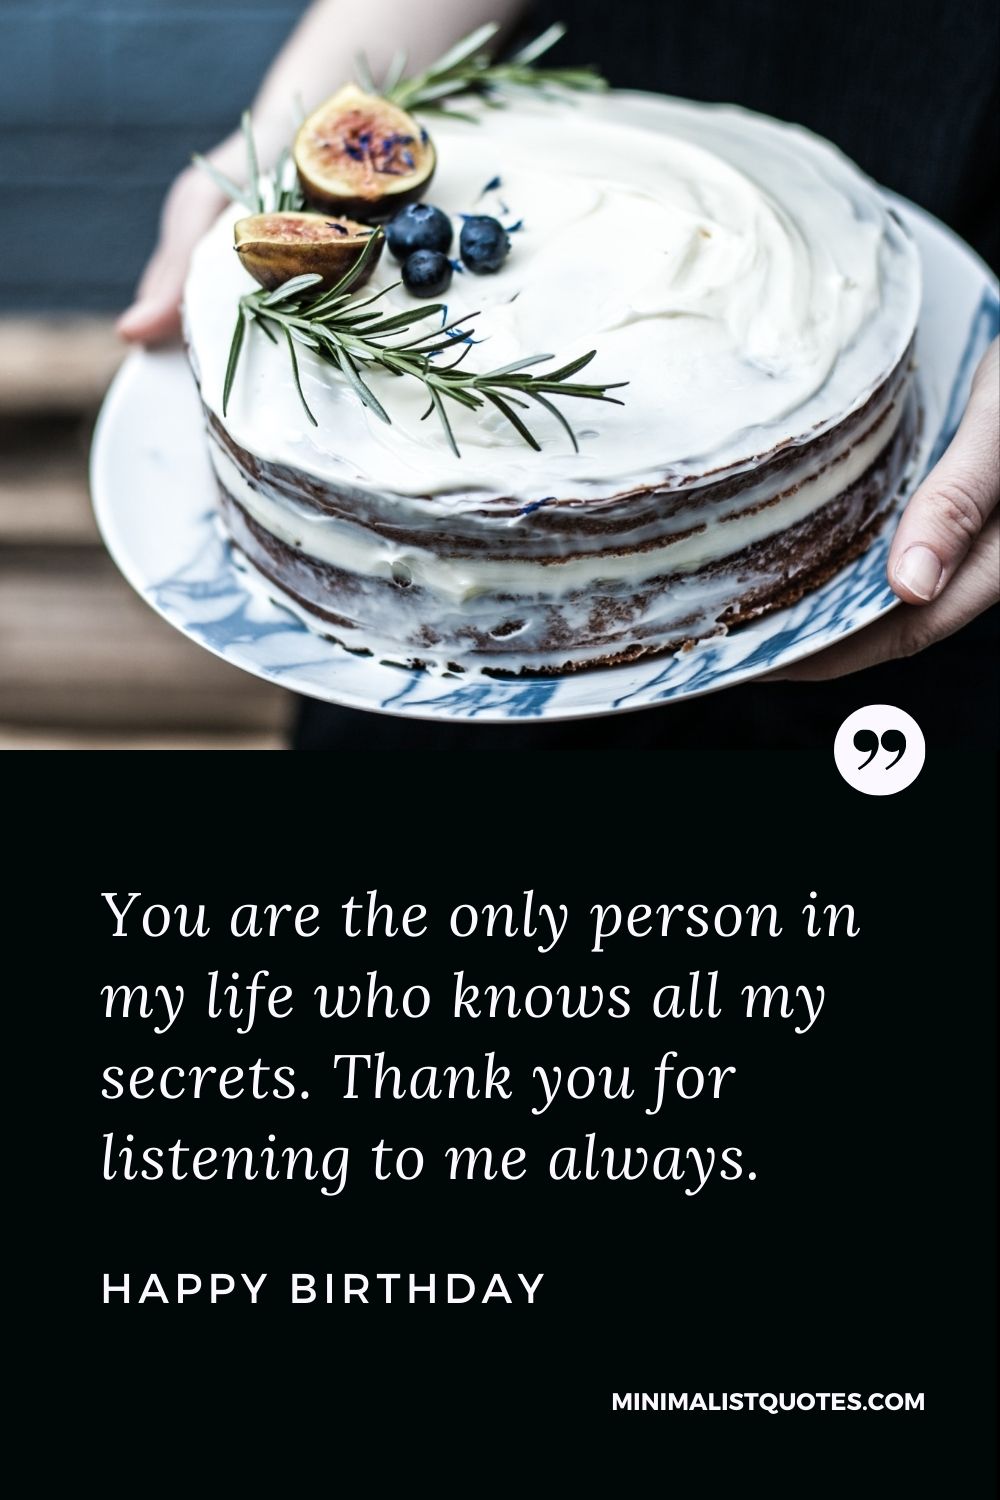 Happy Birthday Wishes - You are the only person in my life who knows all my secrets. Thank you for listening to me always.